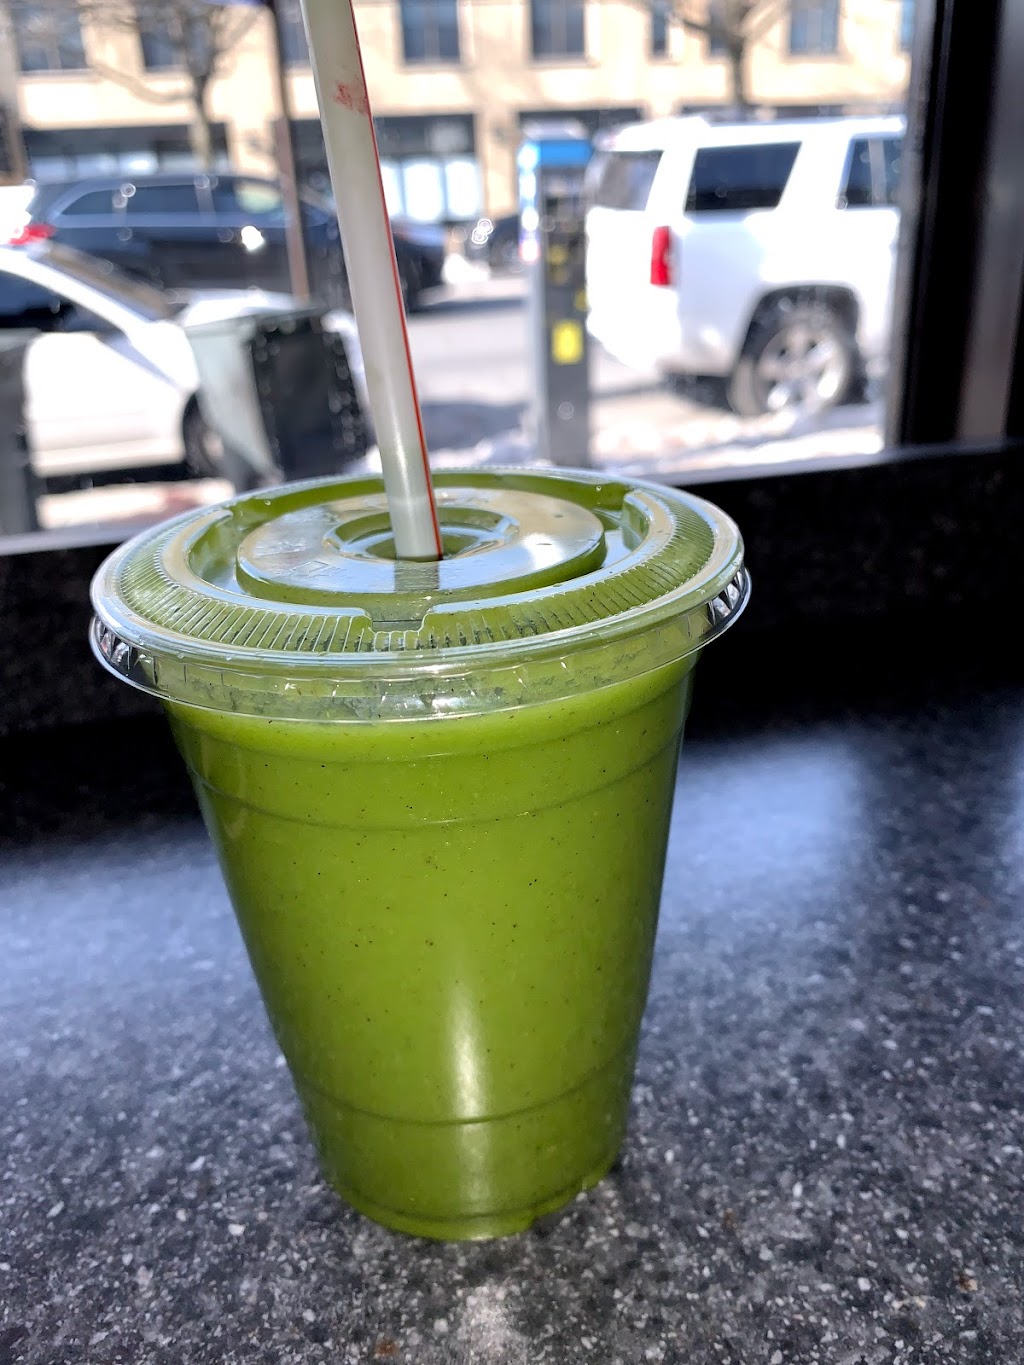 Juices For Life | 3463 E Tremont Ave, The Bronx, NY 10465, USA | Phone: (347) 281-9060